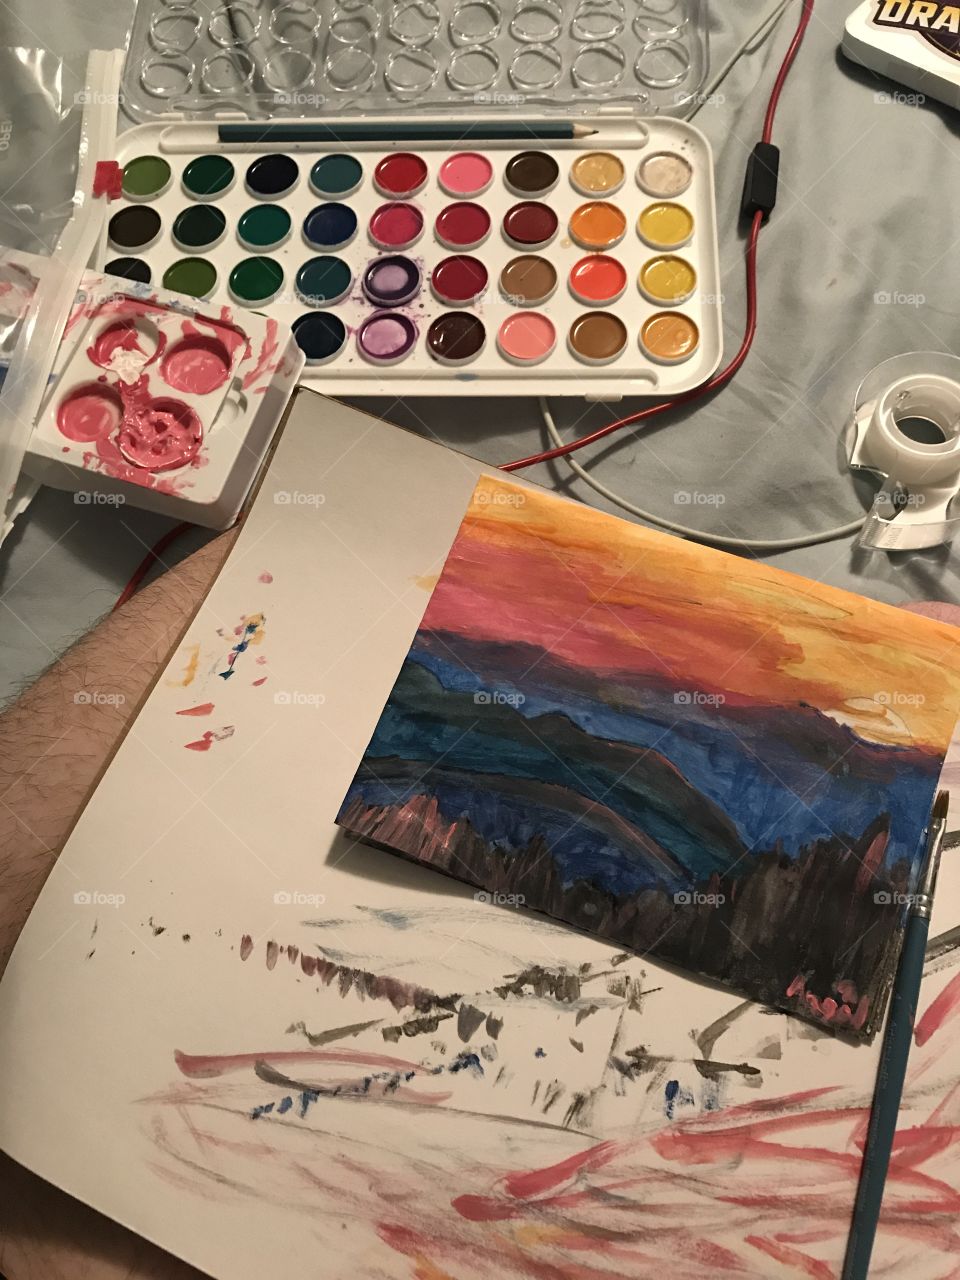 A set of watercolors and acrylics next to a piece of paper, a painting of a sunset in the mountains, and a tape dispenser